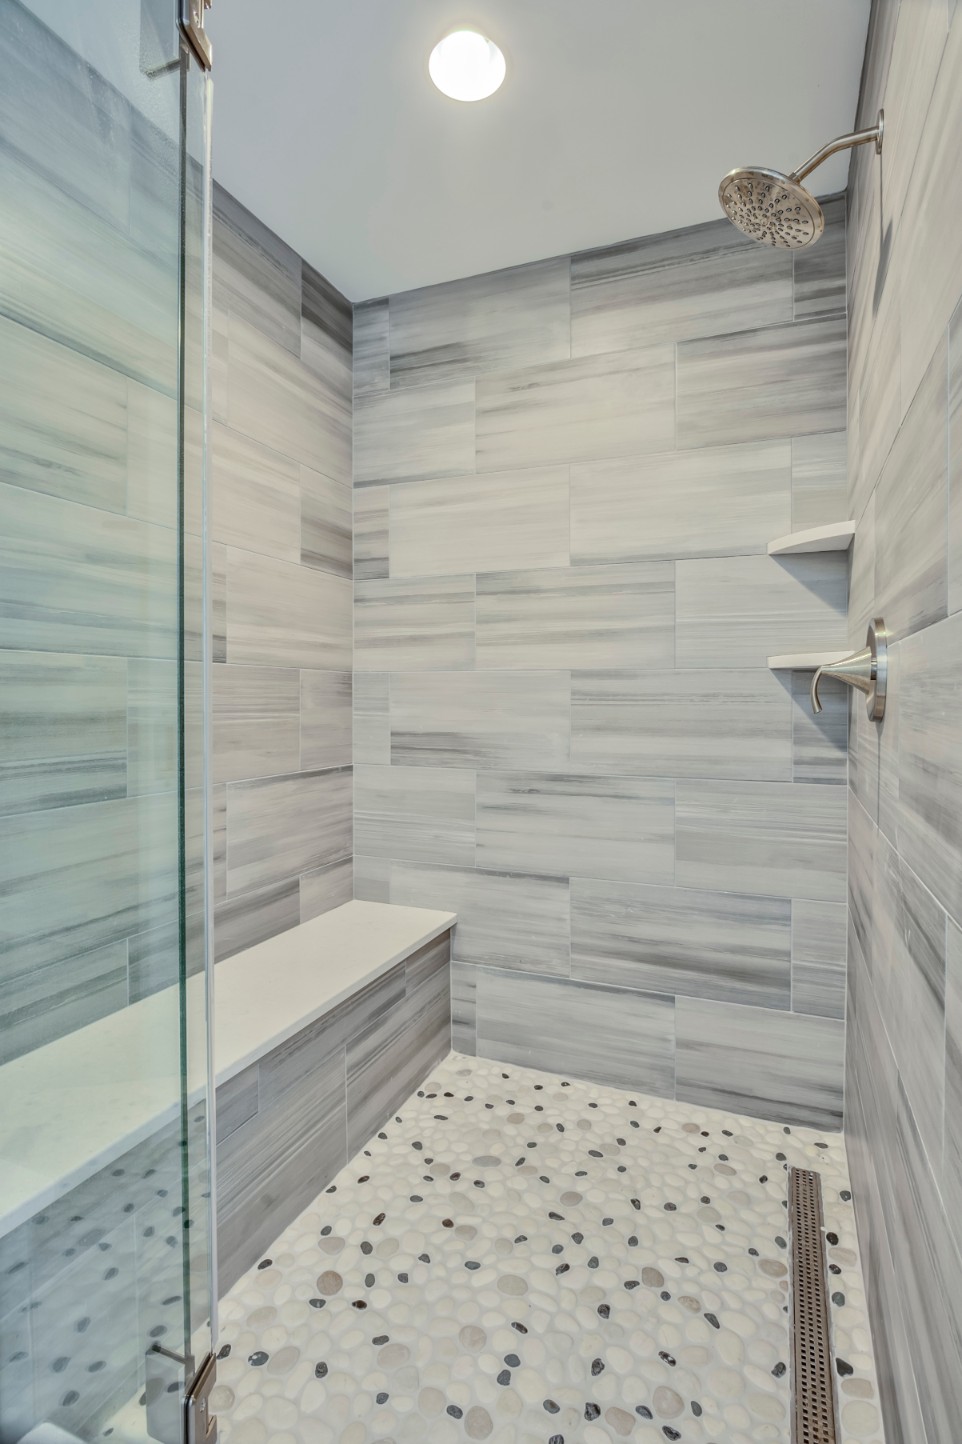 Canal Way Renovation in Bethany Beach DE - Bathroom - Shower with Stone Mosaic Floor and Grey Striped Wall Tiles